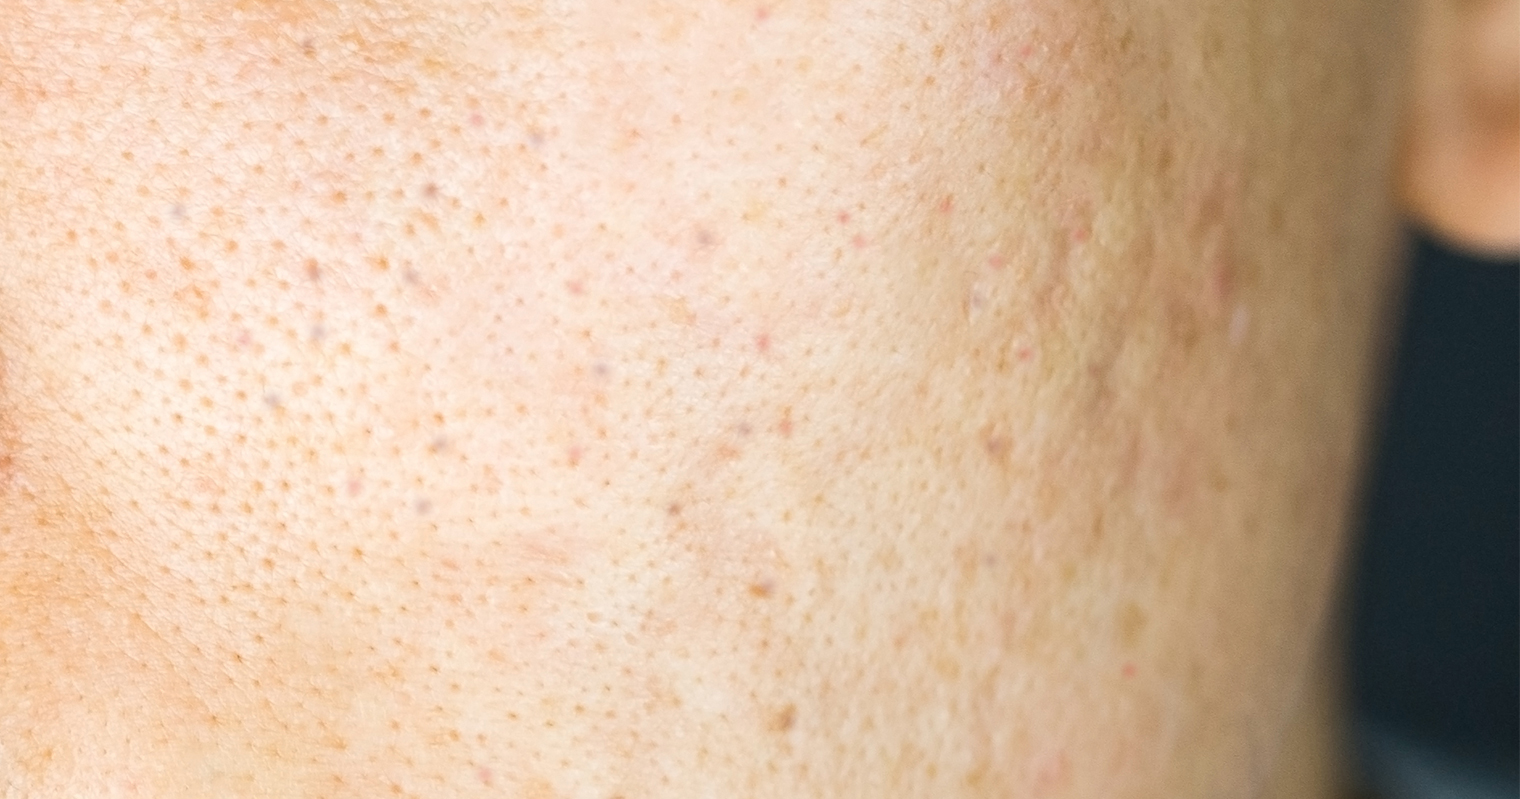 uneven skin texture is a characteristic of bad skin